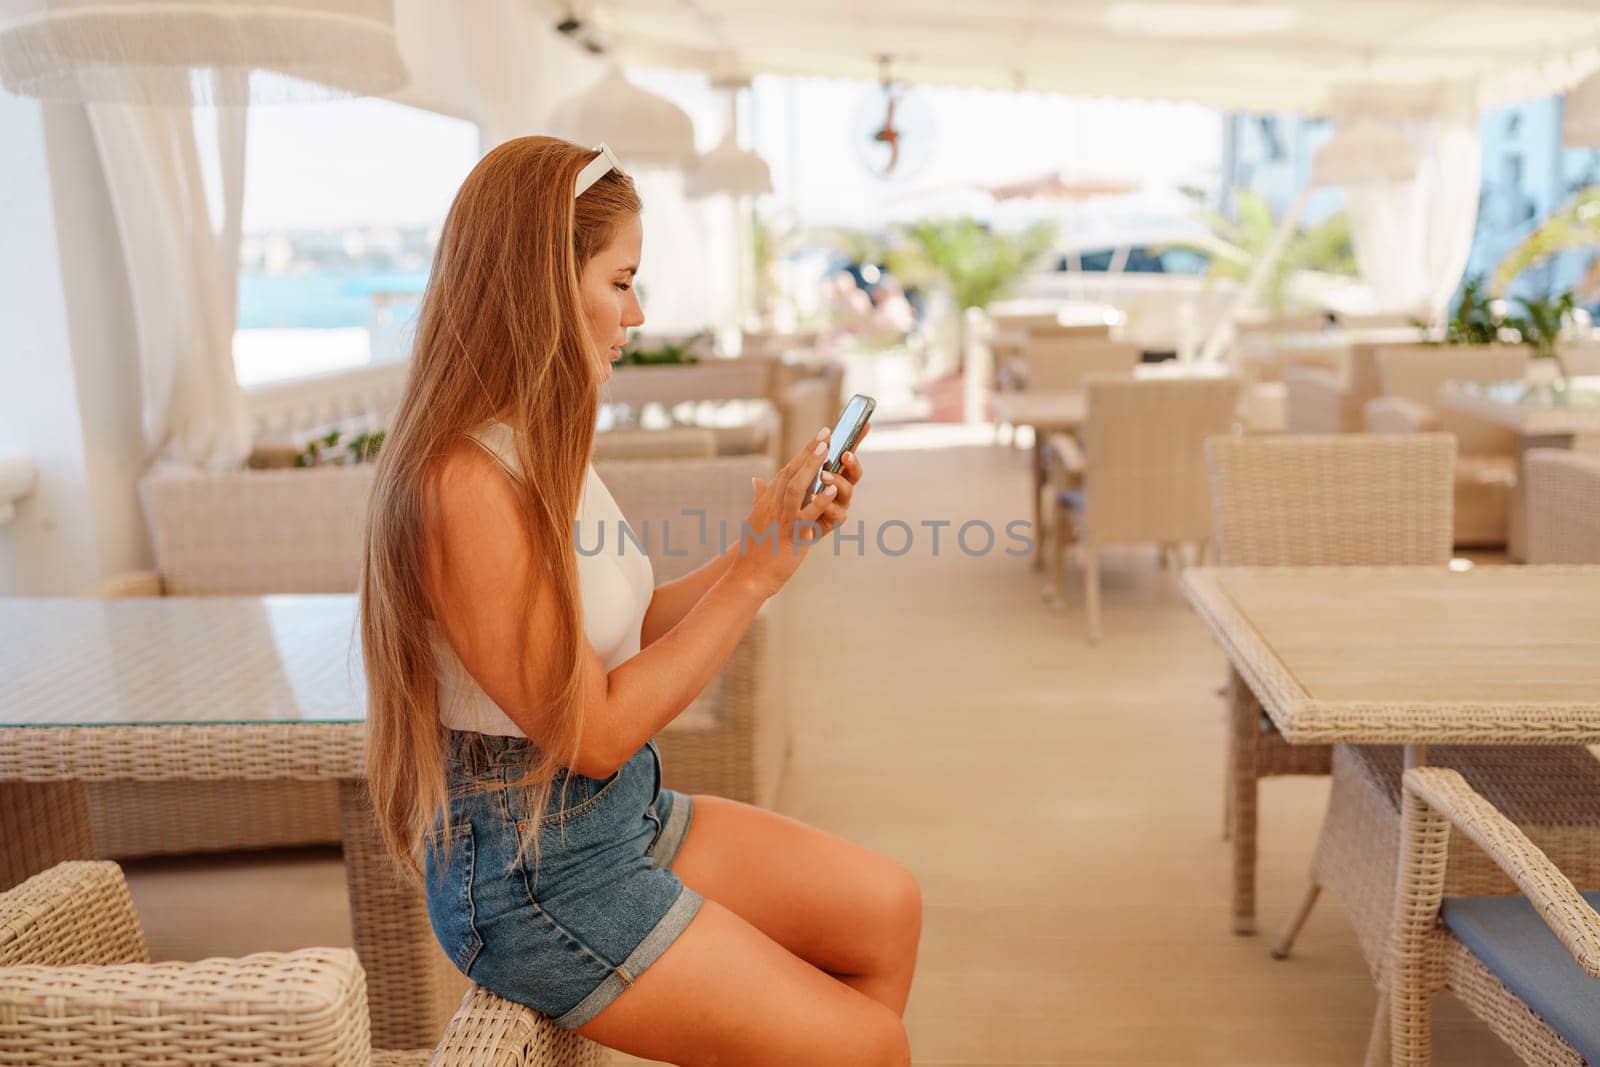 Cafe woman sitting at a table with a cell phone in her hand. She is looking at the screen and she is focused on her phone. The scene takes place in a restaurant or cafe, with multiple chairs